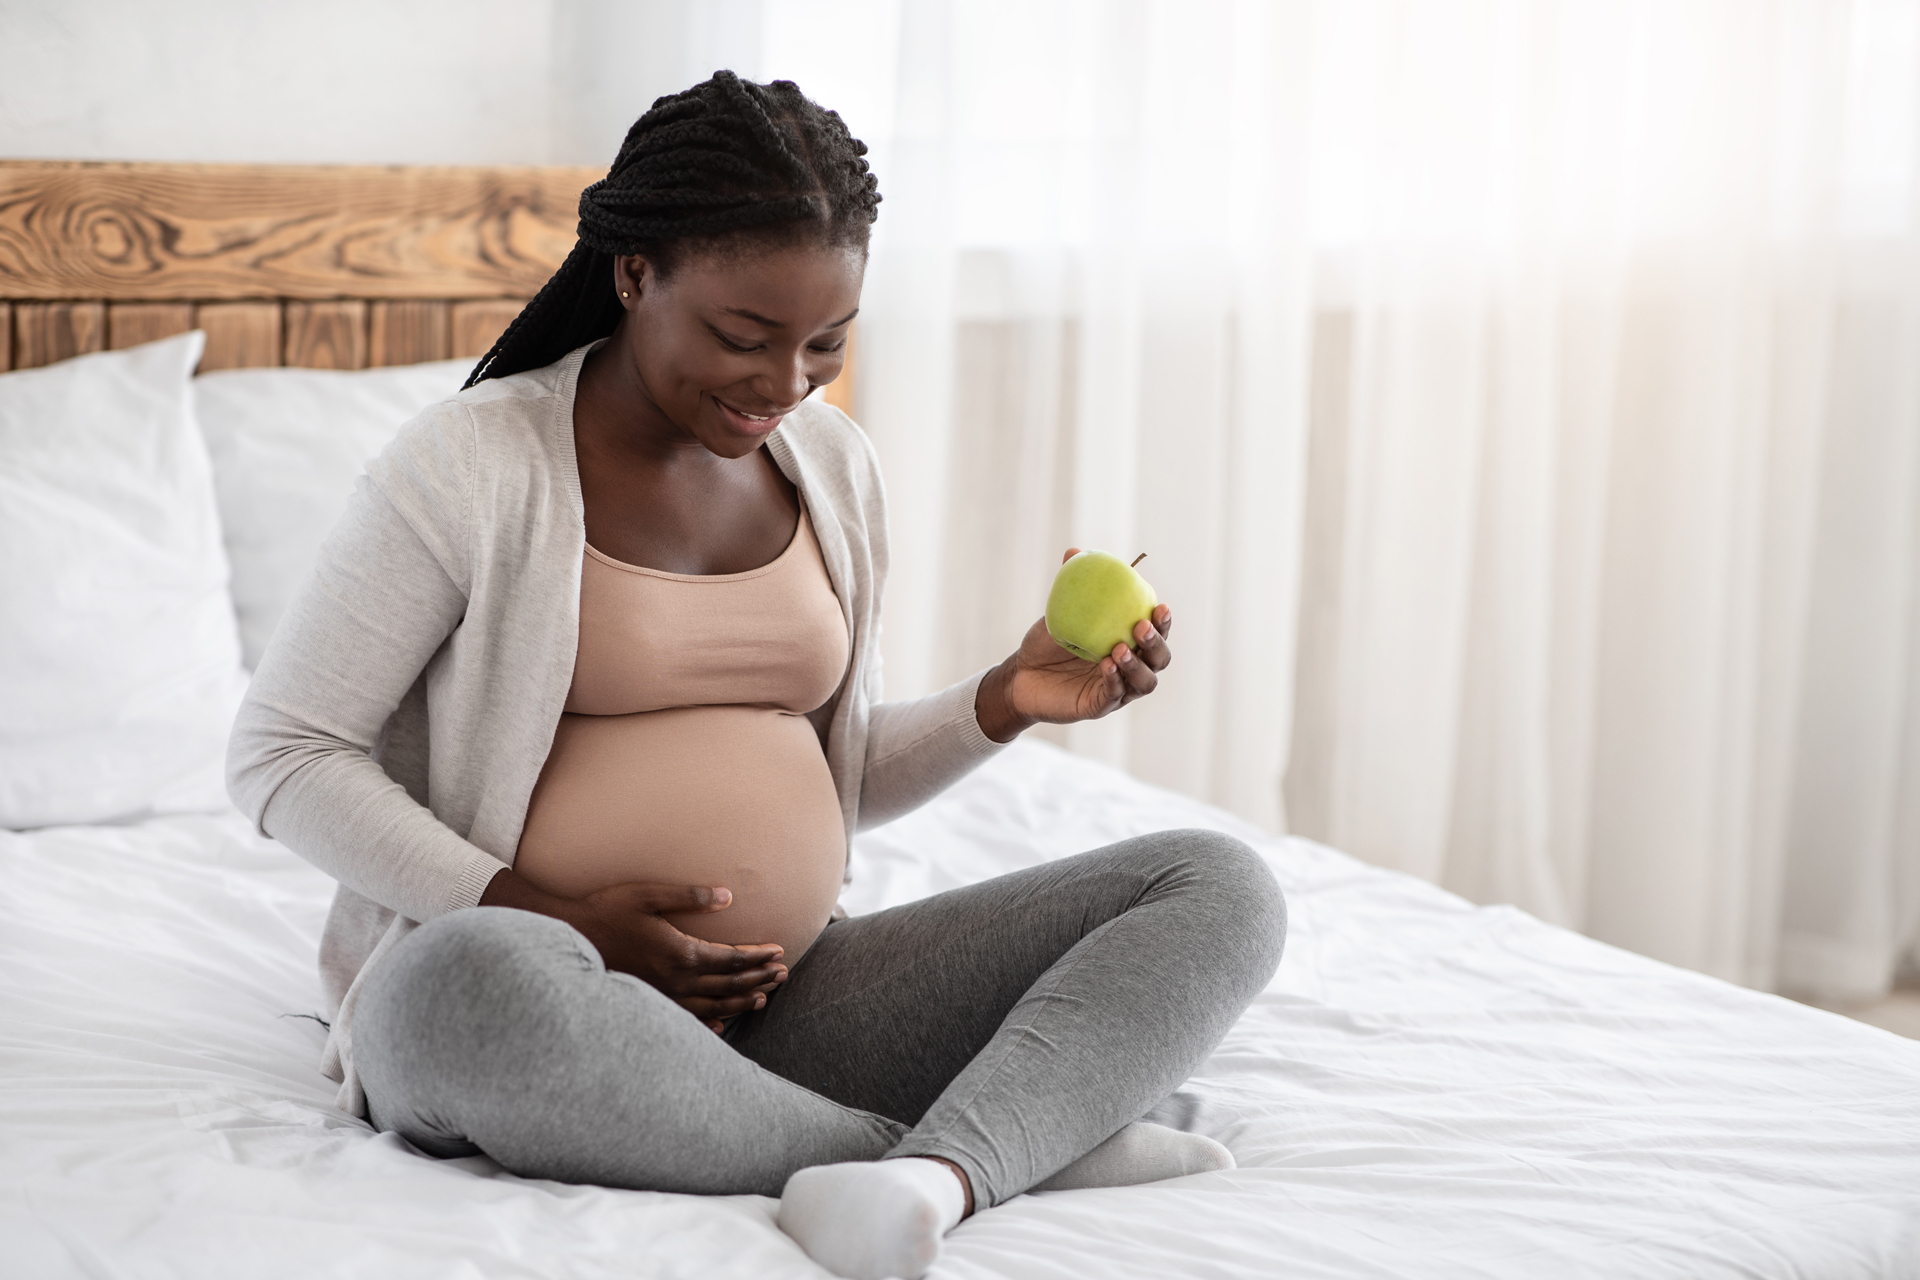 A pregnant woman sits cross-legged on a bed cradling her belly with one hand and holding an apple in the other